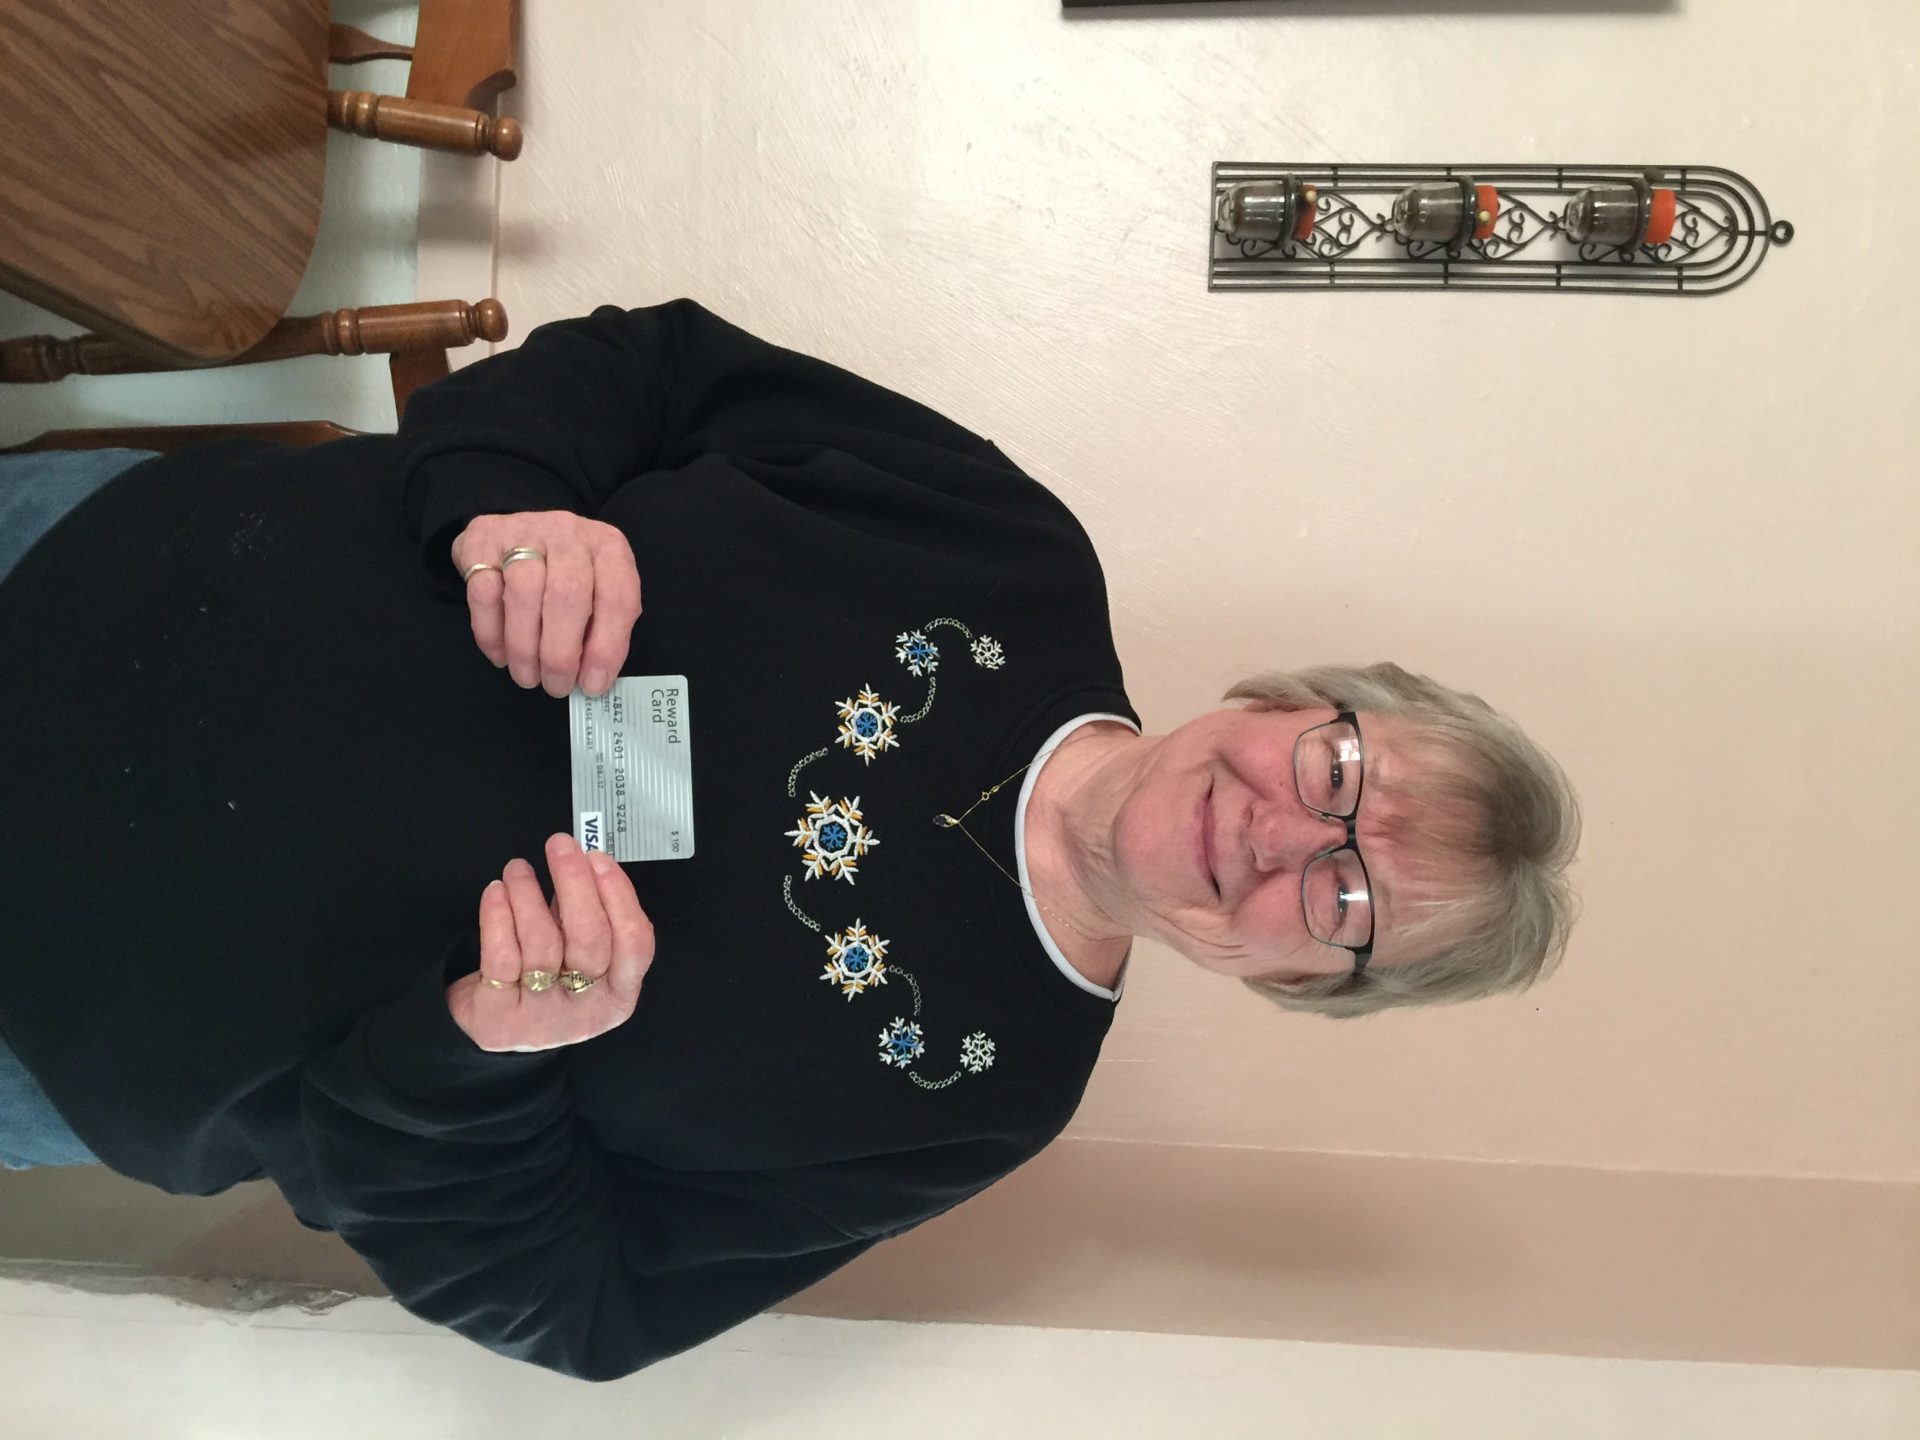 Joyce Bottorf of Petersburg, NE receives her $100 Visa gift card for completing the Great Plains Communications Q3 Customer Survey.